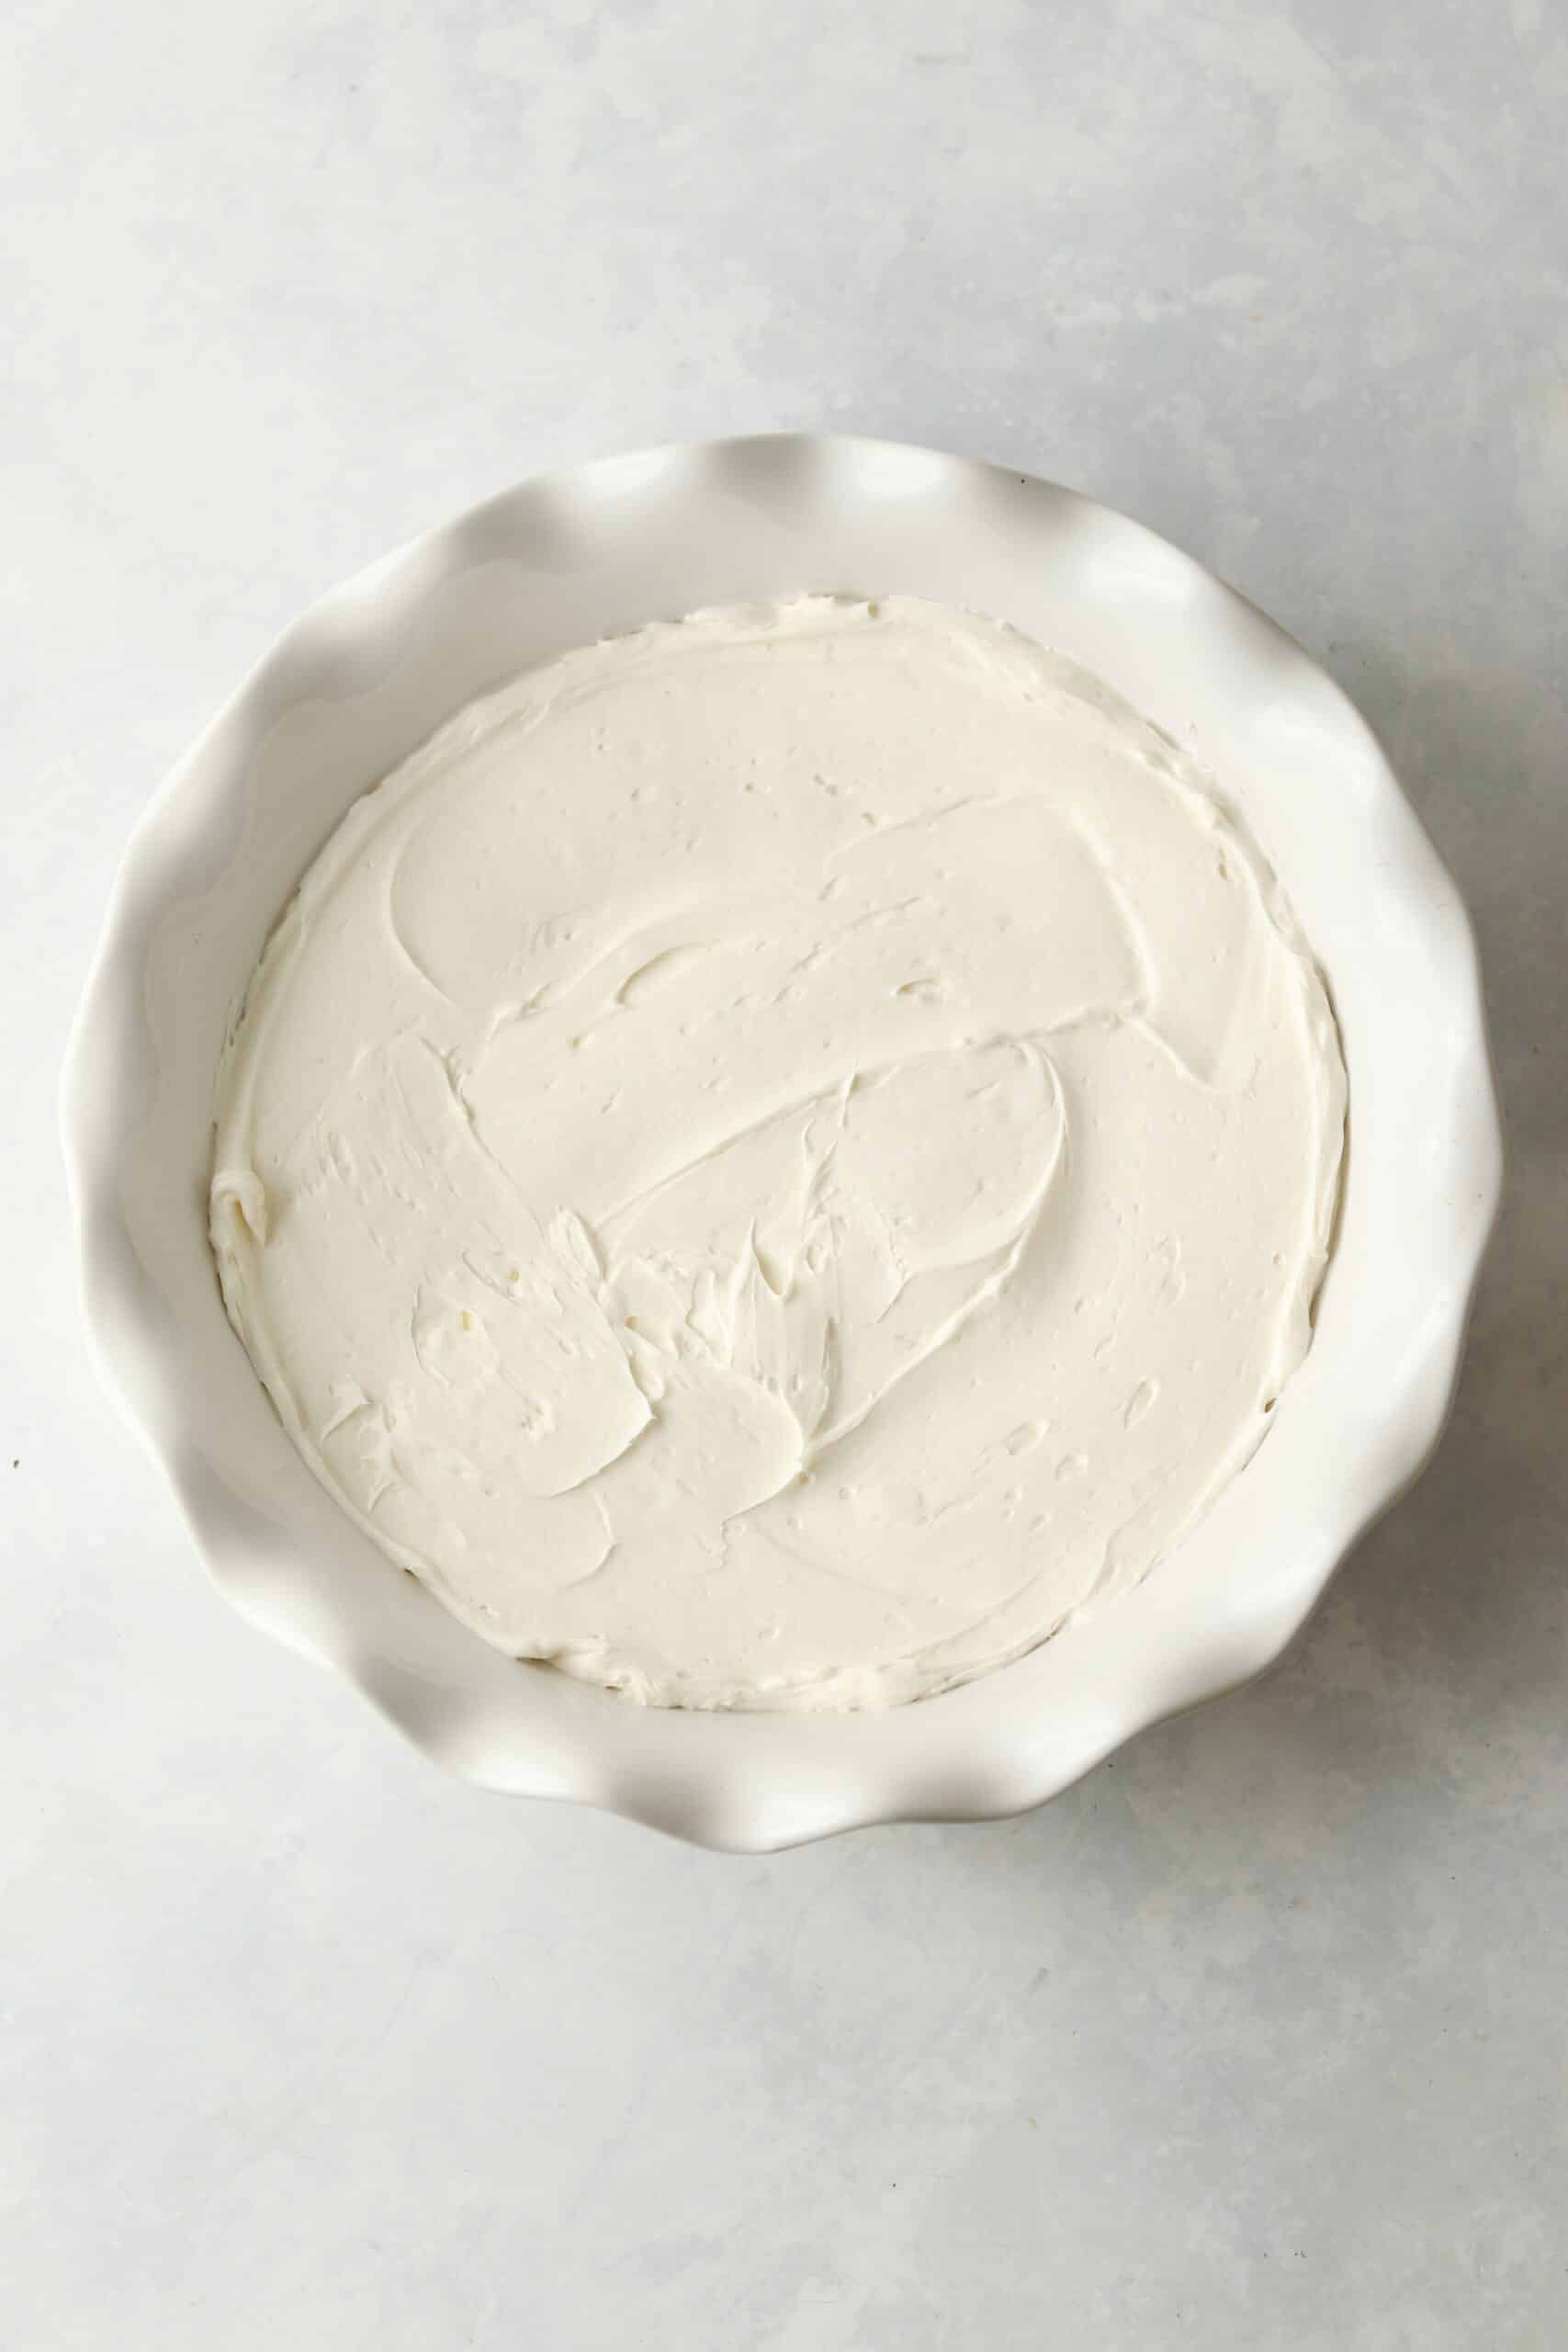 whipped cream cheese in a pie plate.